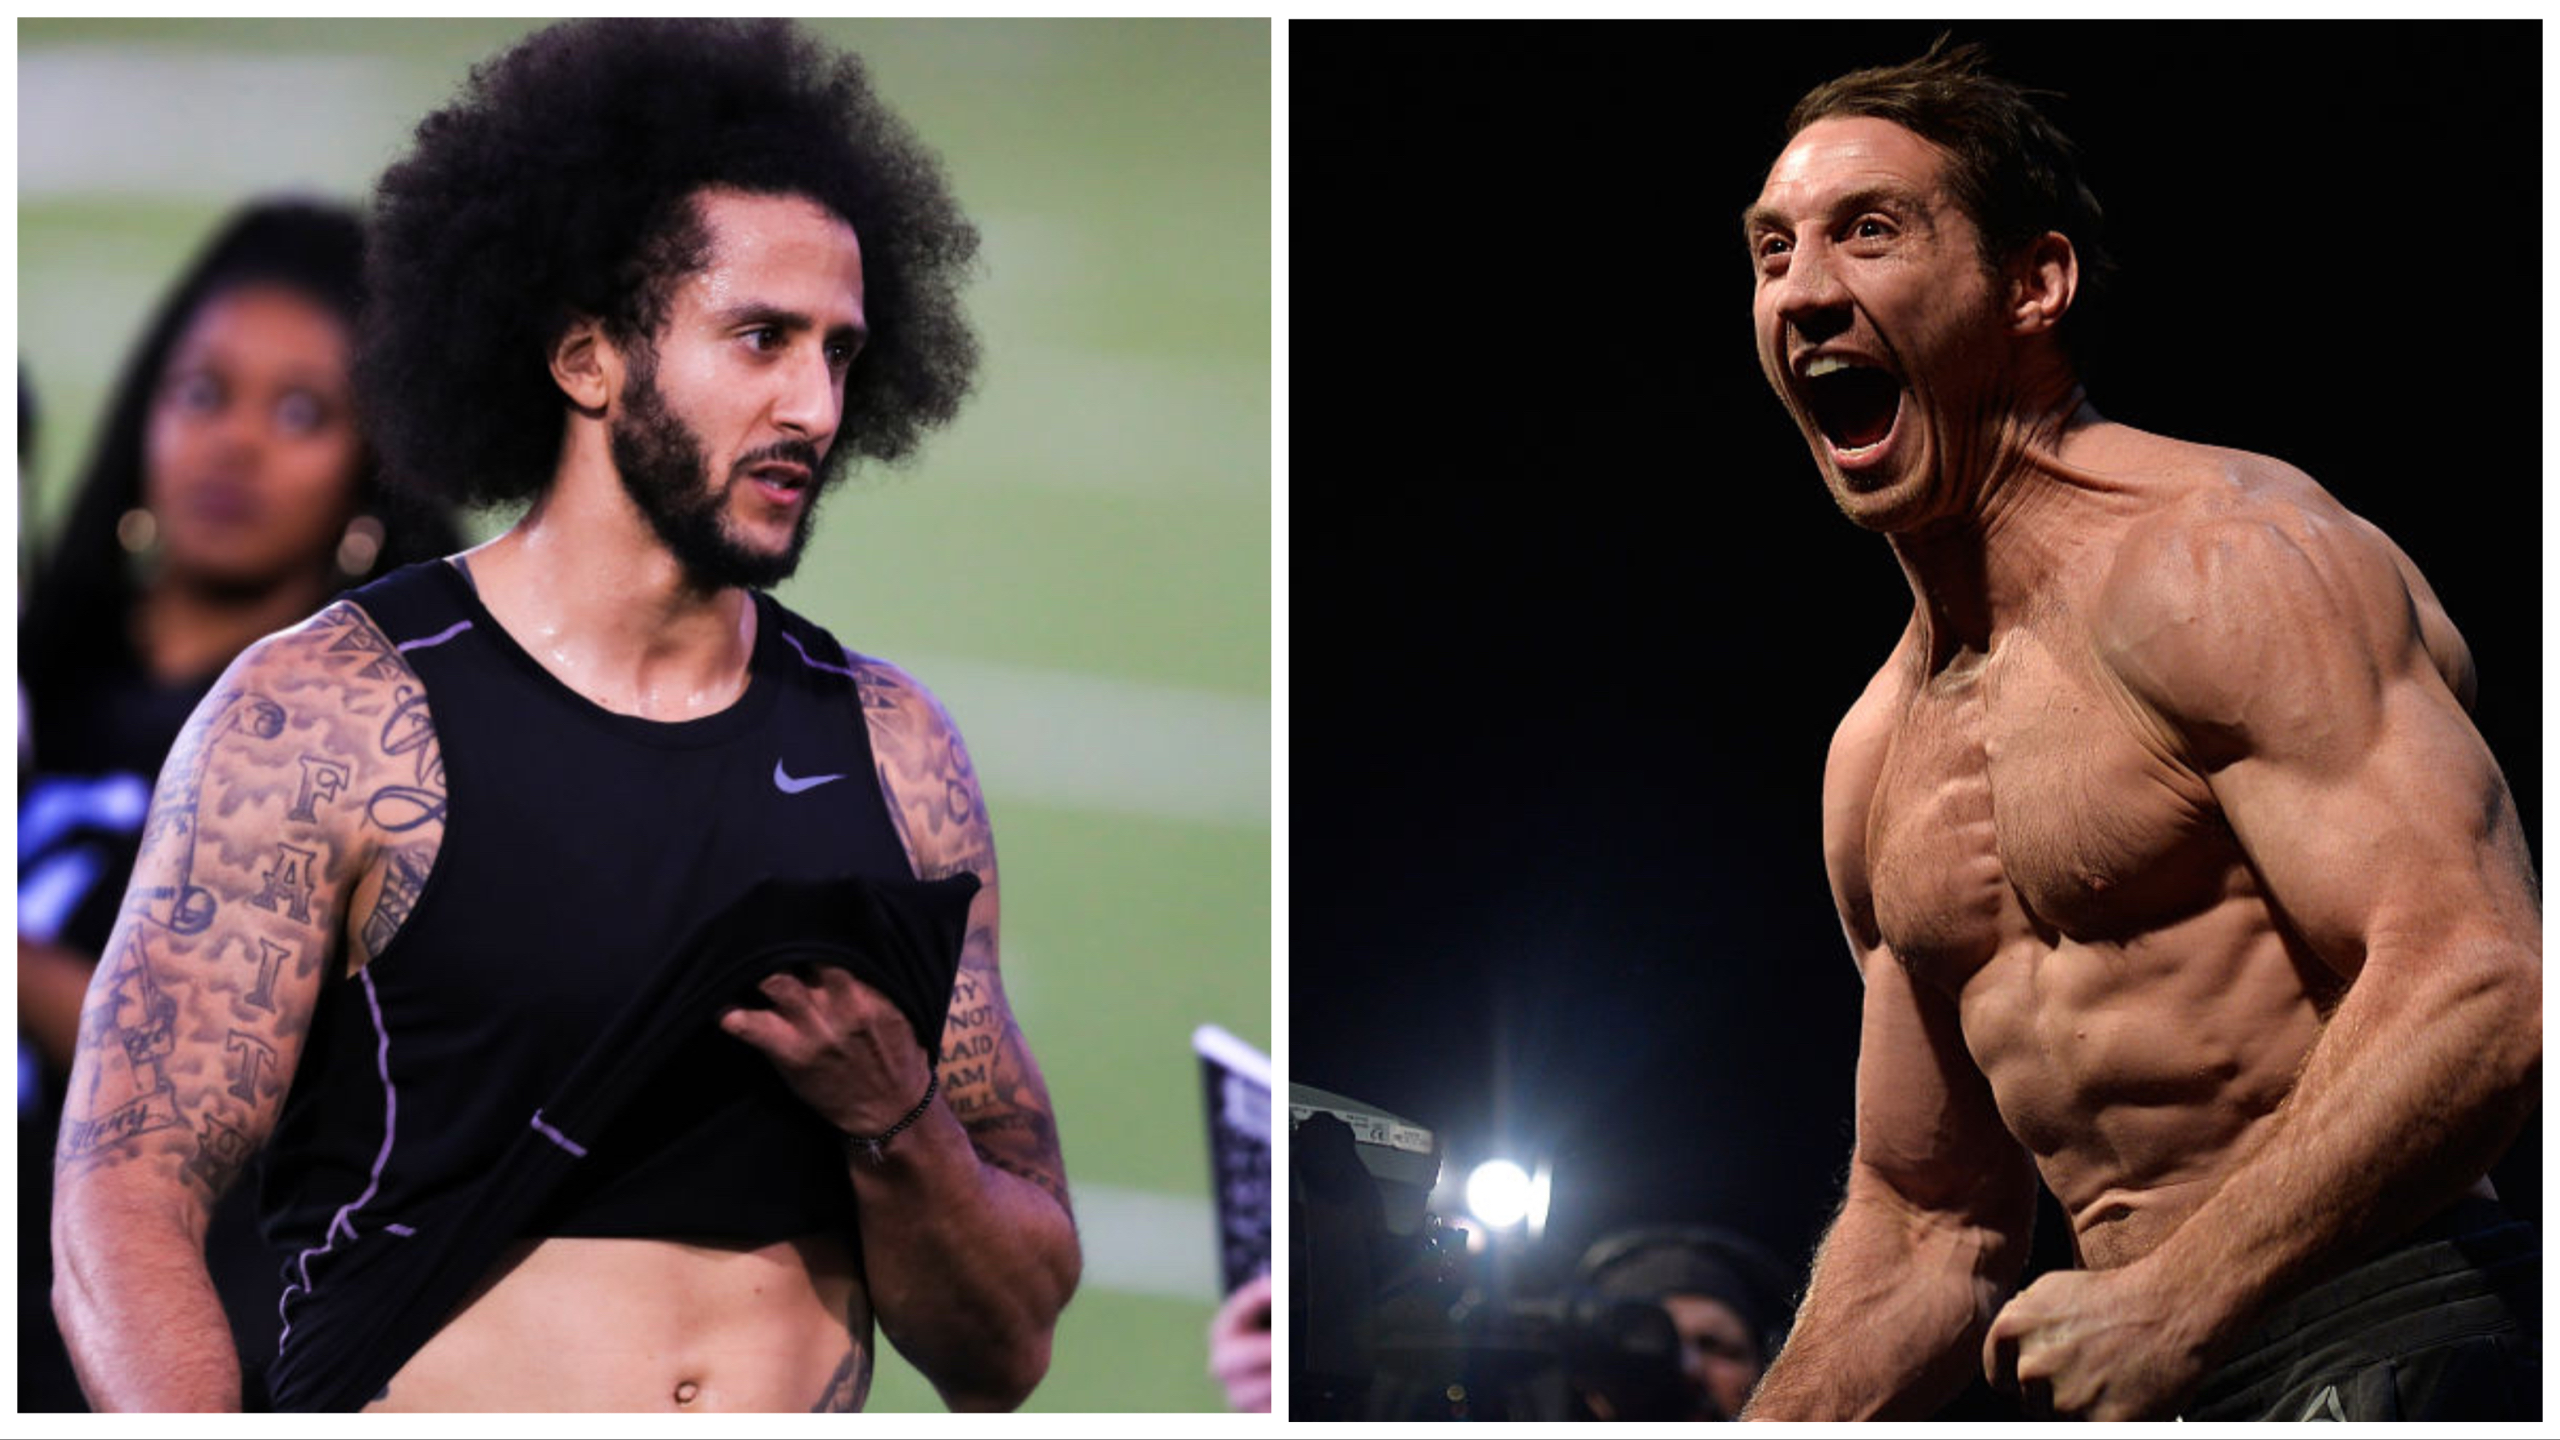 MMA Fighter, Special Forces Vet Tim Kennedy Hammers Colin Kaepernick For Accusing White Adoptive Parents Of Racism